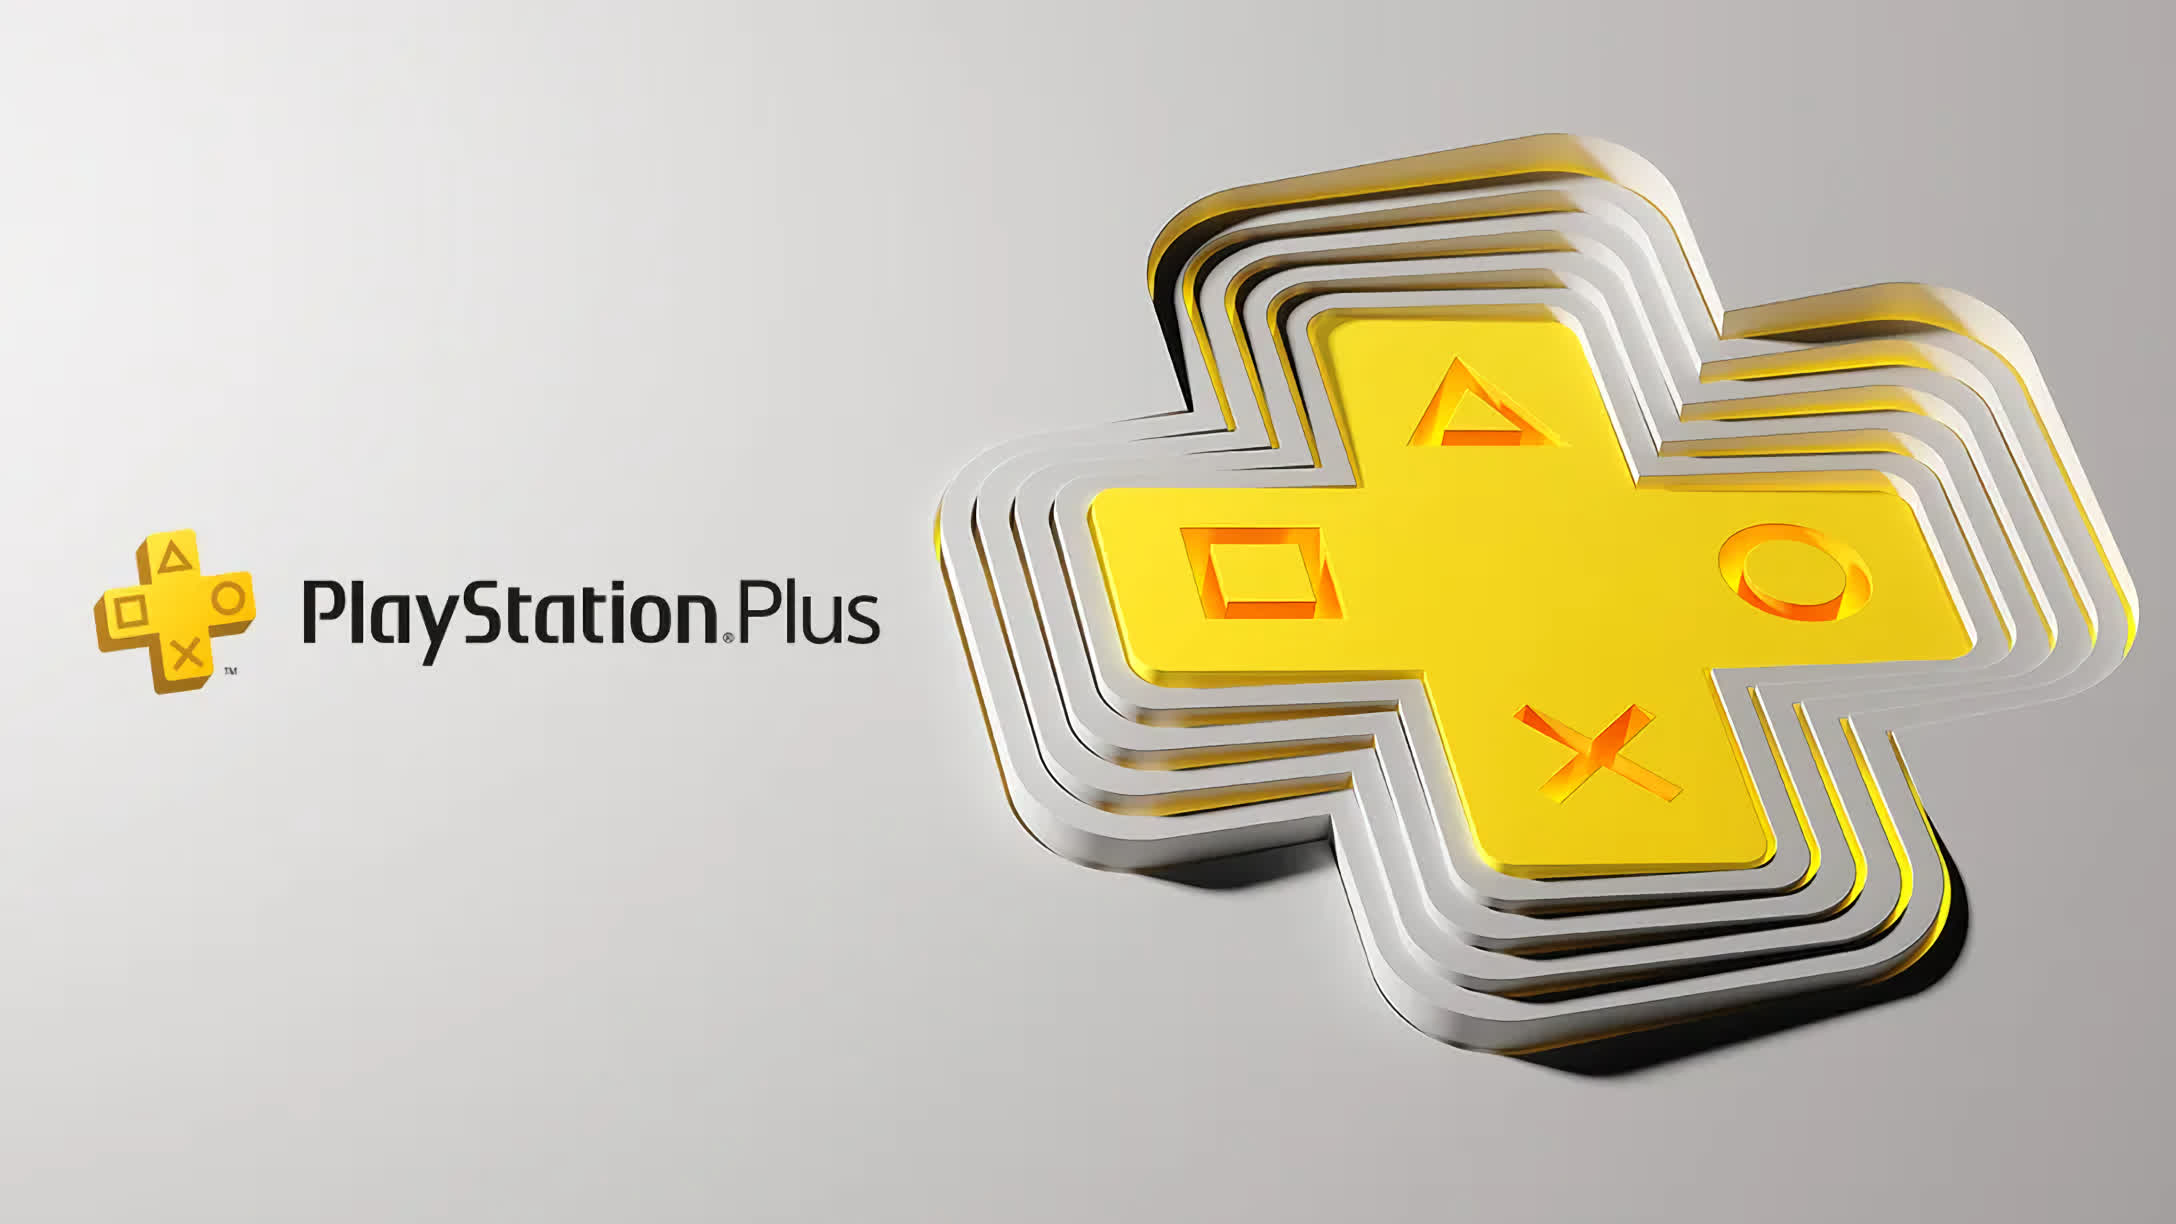 PlayStation Plus relaunches in June with new membership tiers but without day-one releases